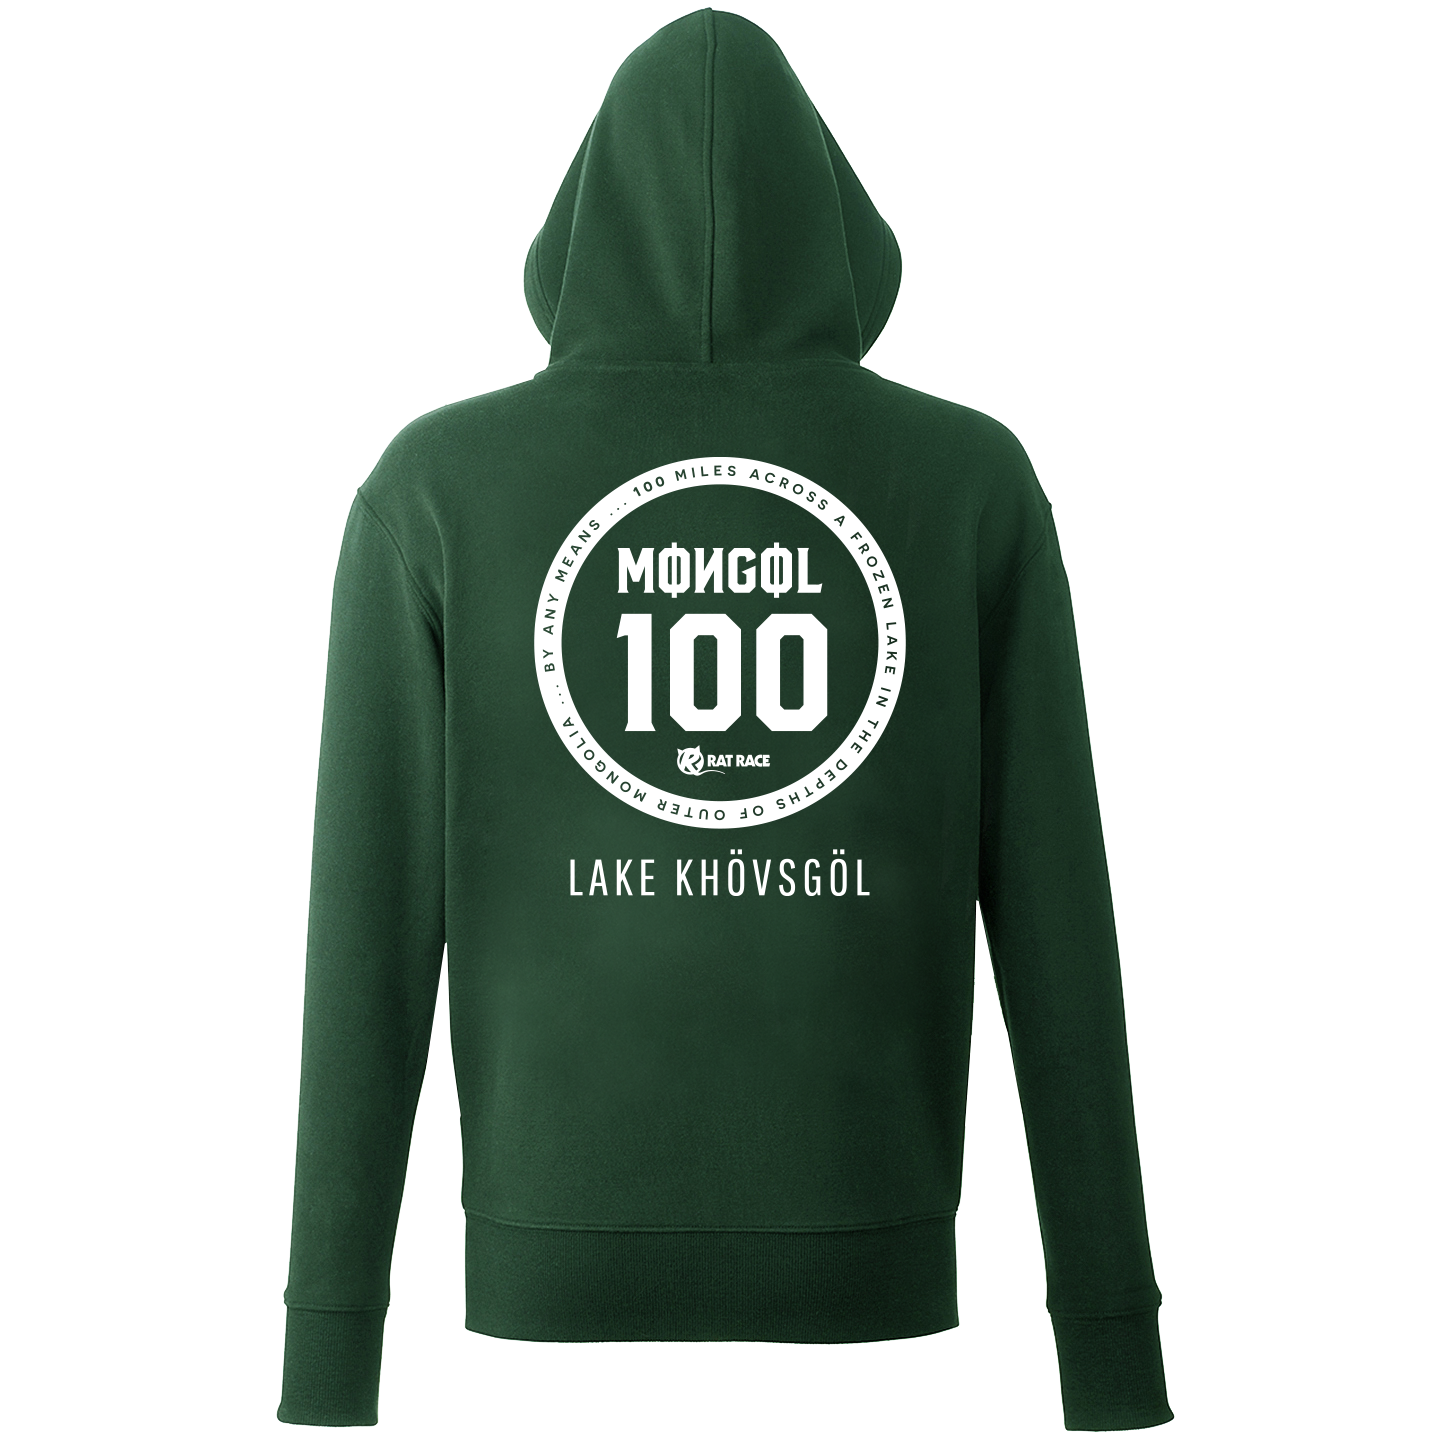 Mongol 100 Hodie - Forest Green